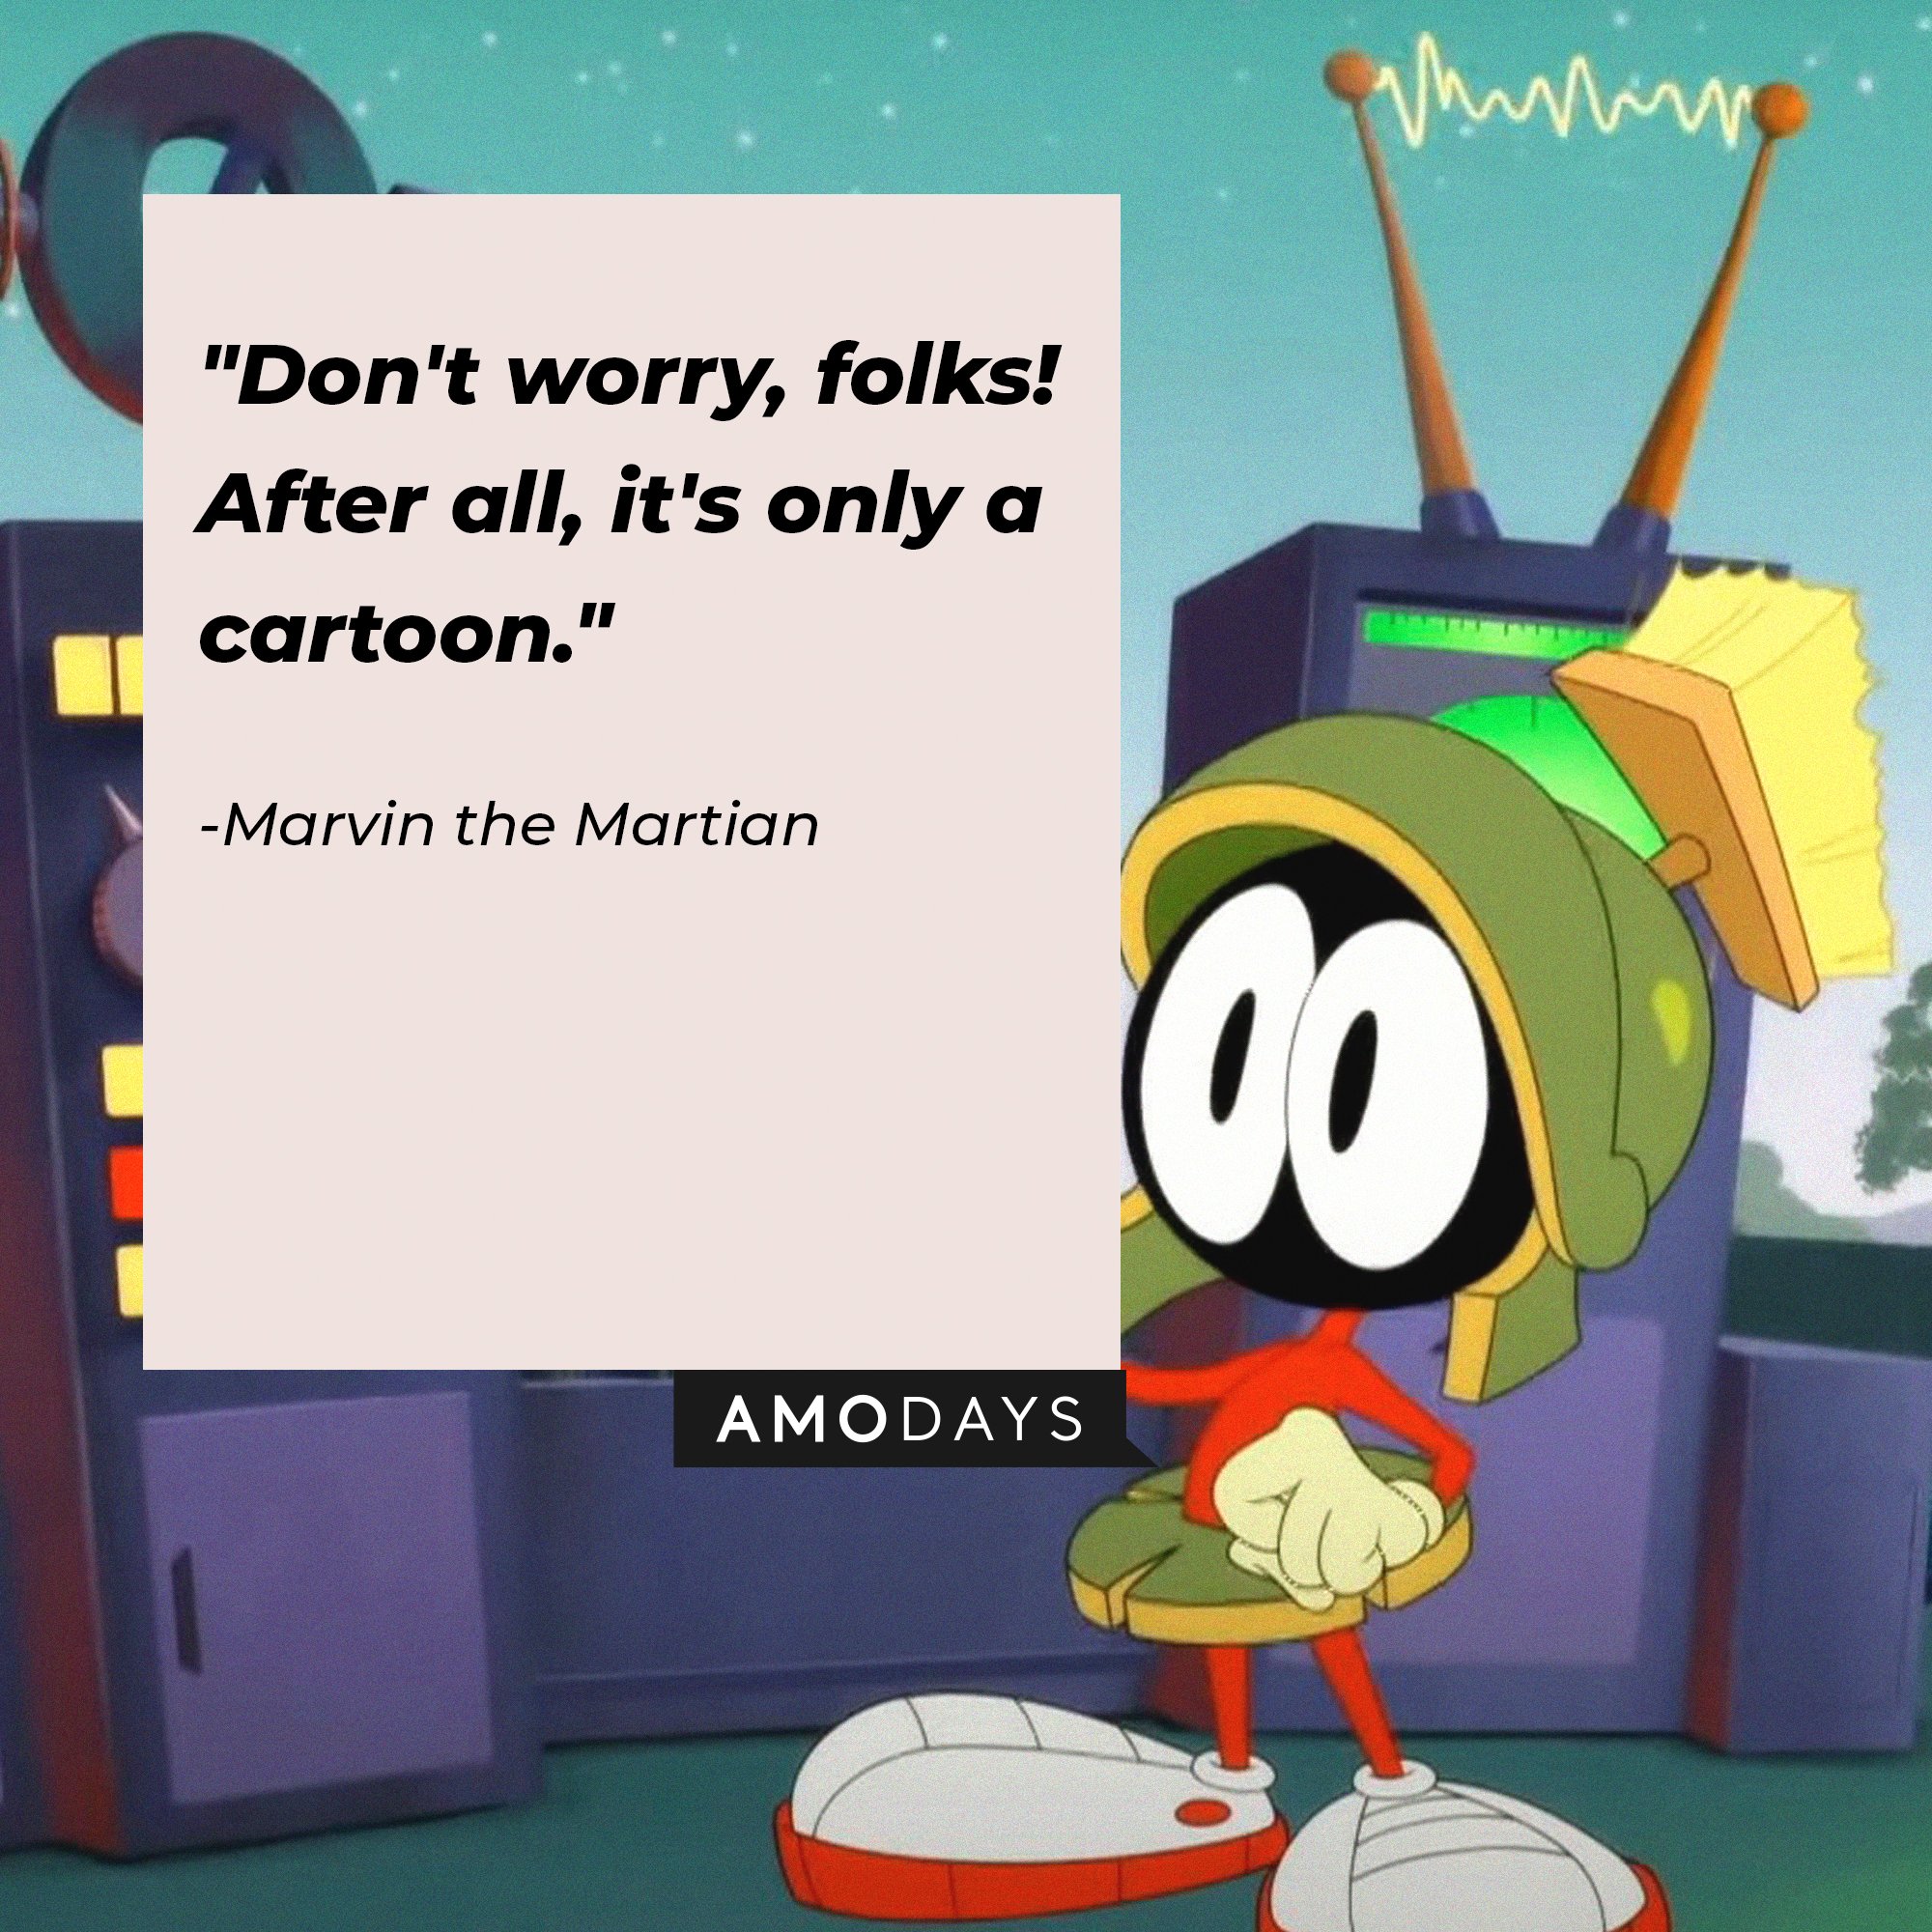 Marvin the Martian’s quote: "Don't worry, folks! After all, it's only a cartoon." | Image: AmoDays